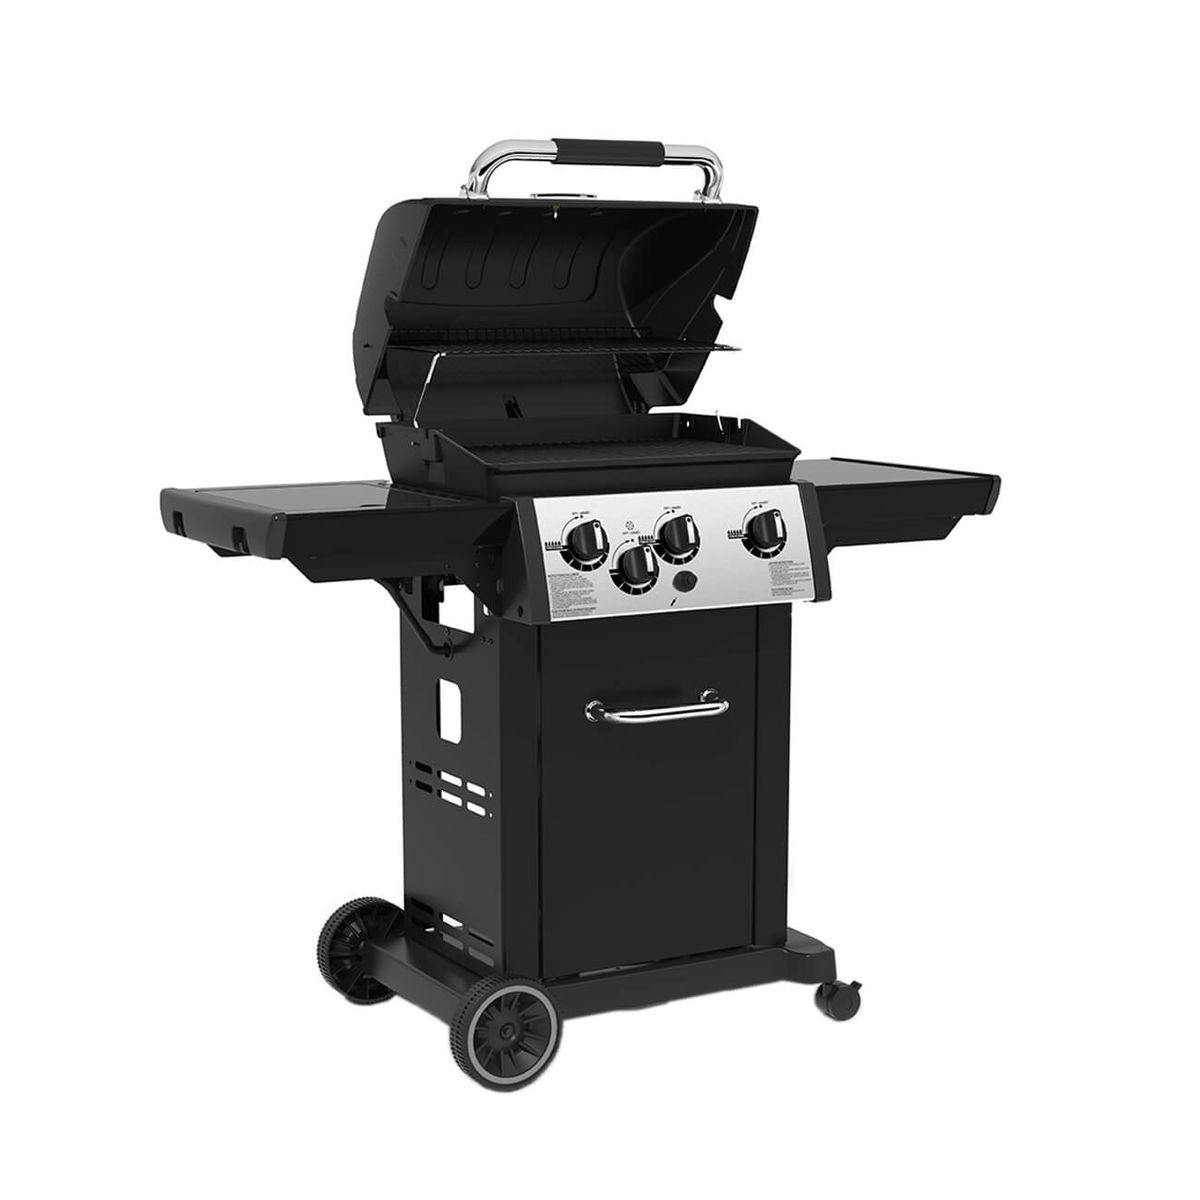 Image of Broil King Royal 340 Grill bei nettoshop.ch